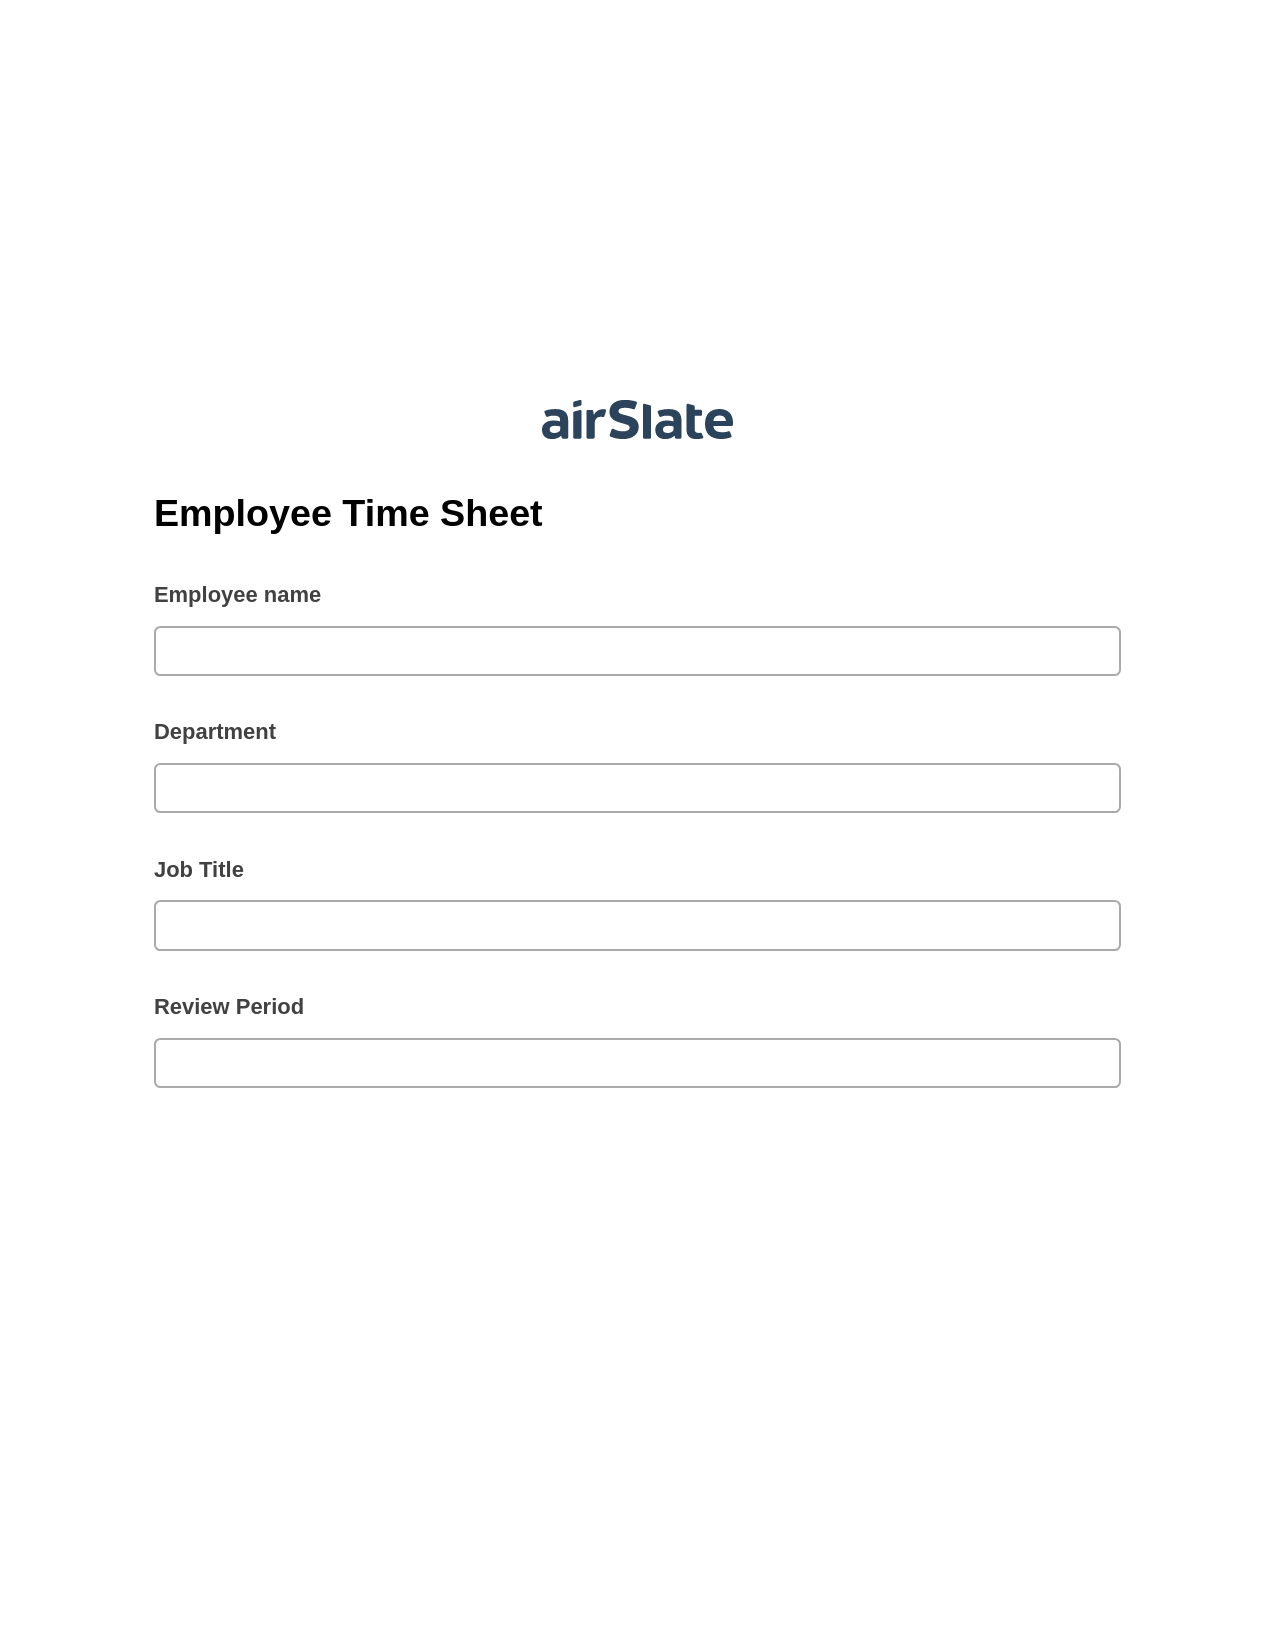 Multirole Employee Time Sheet Prefill from NetSuite records, Create Salesforce Records Bot, Export to Smartsheet